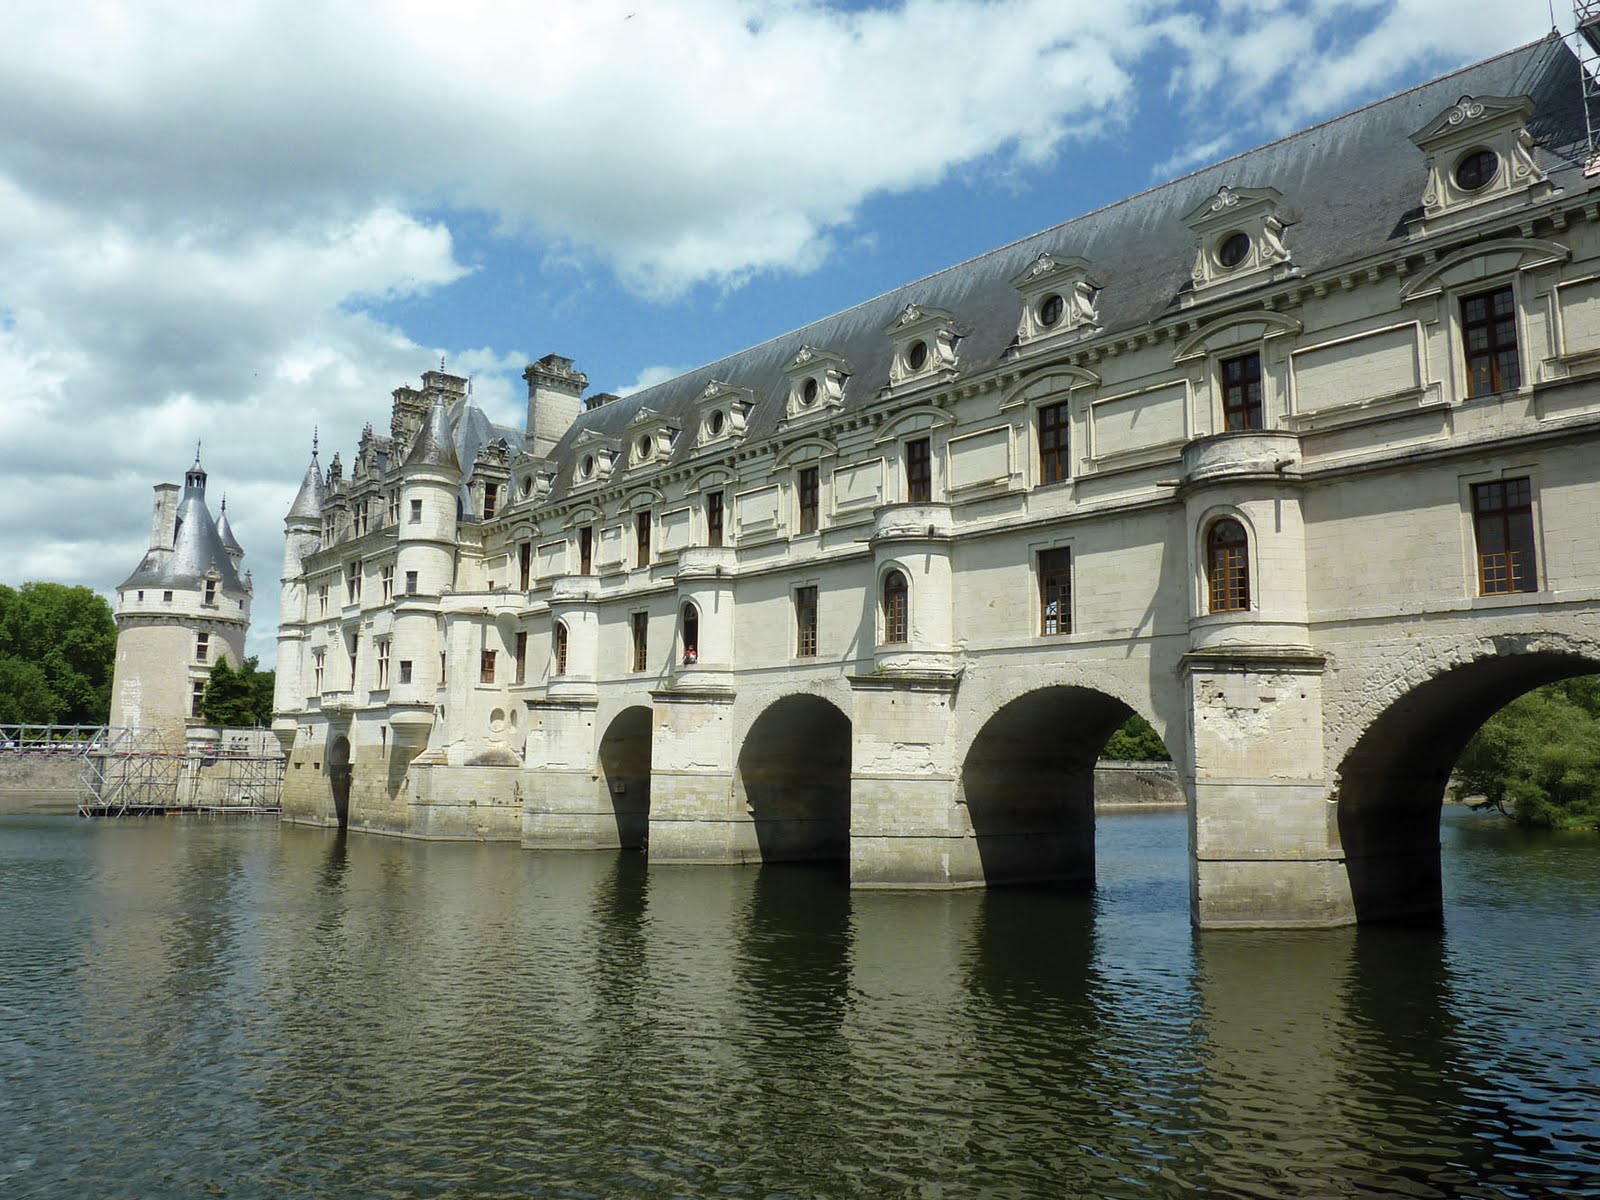 Chenonceau Castle on the Cher River